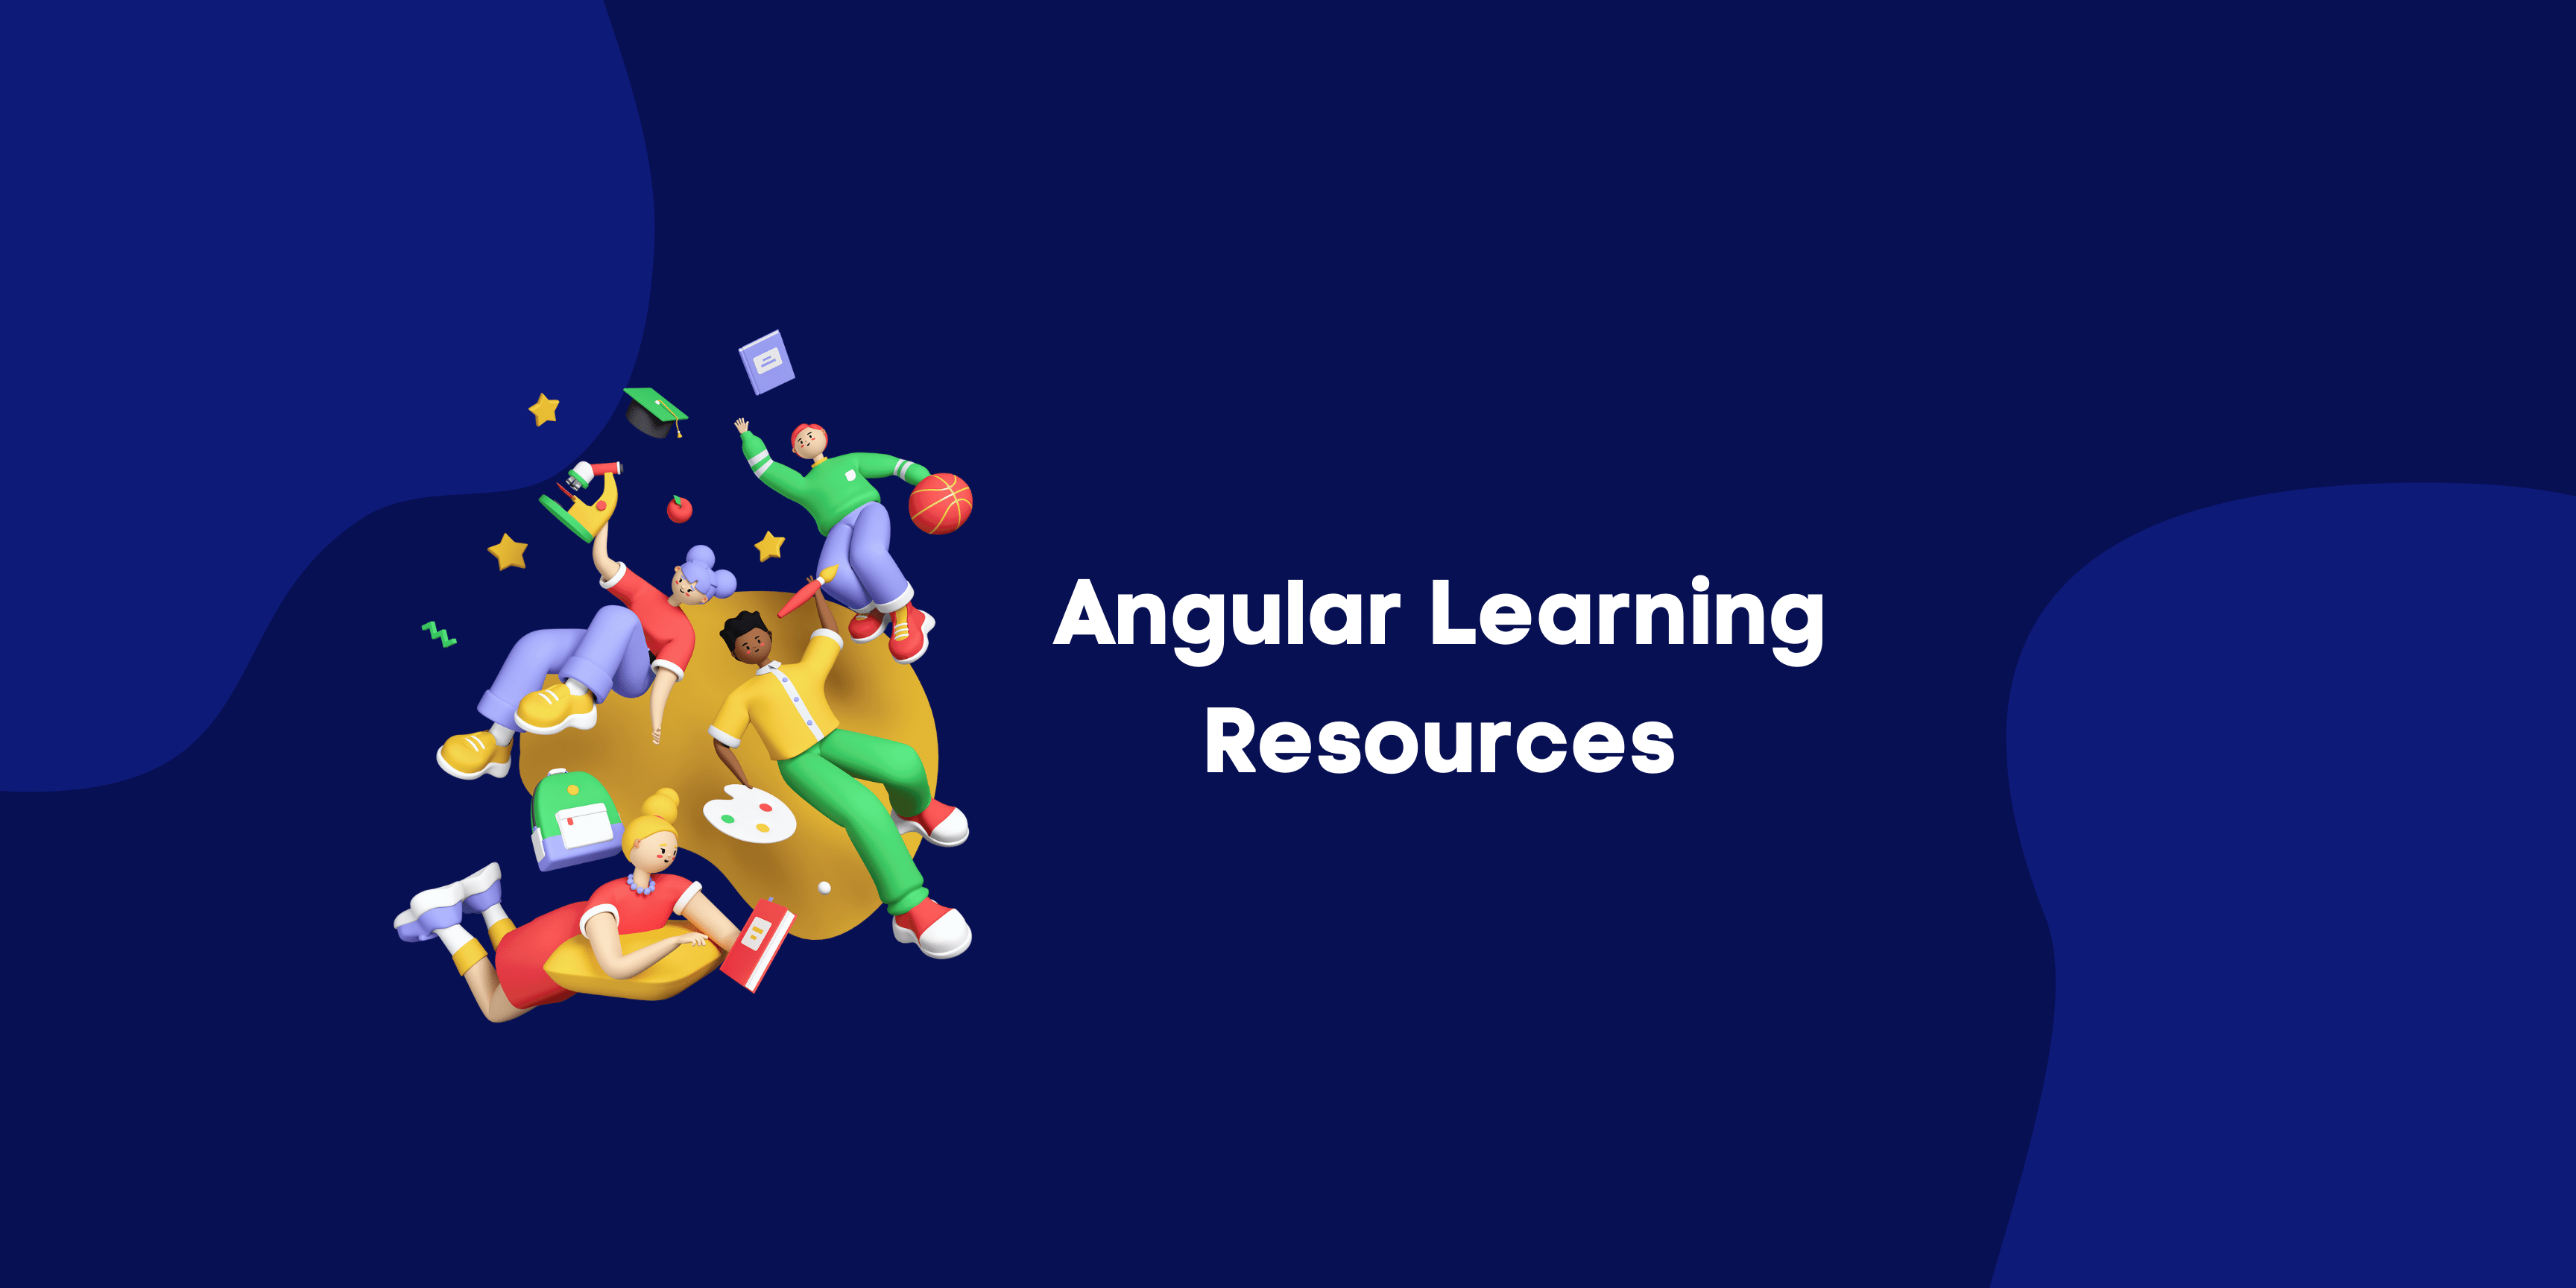 Angular Learning Resources